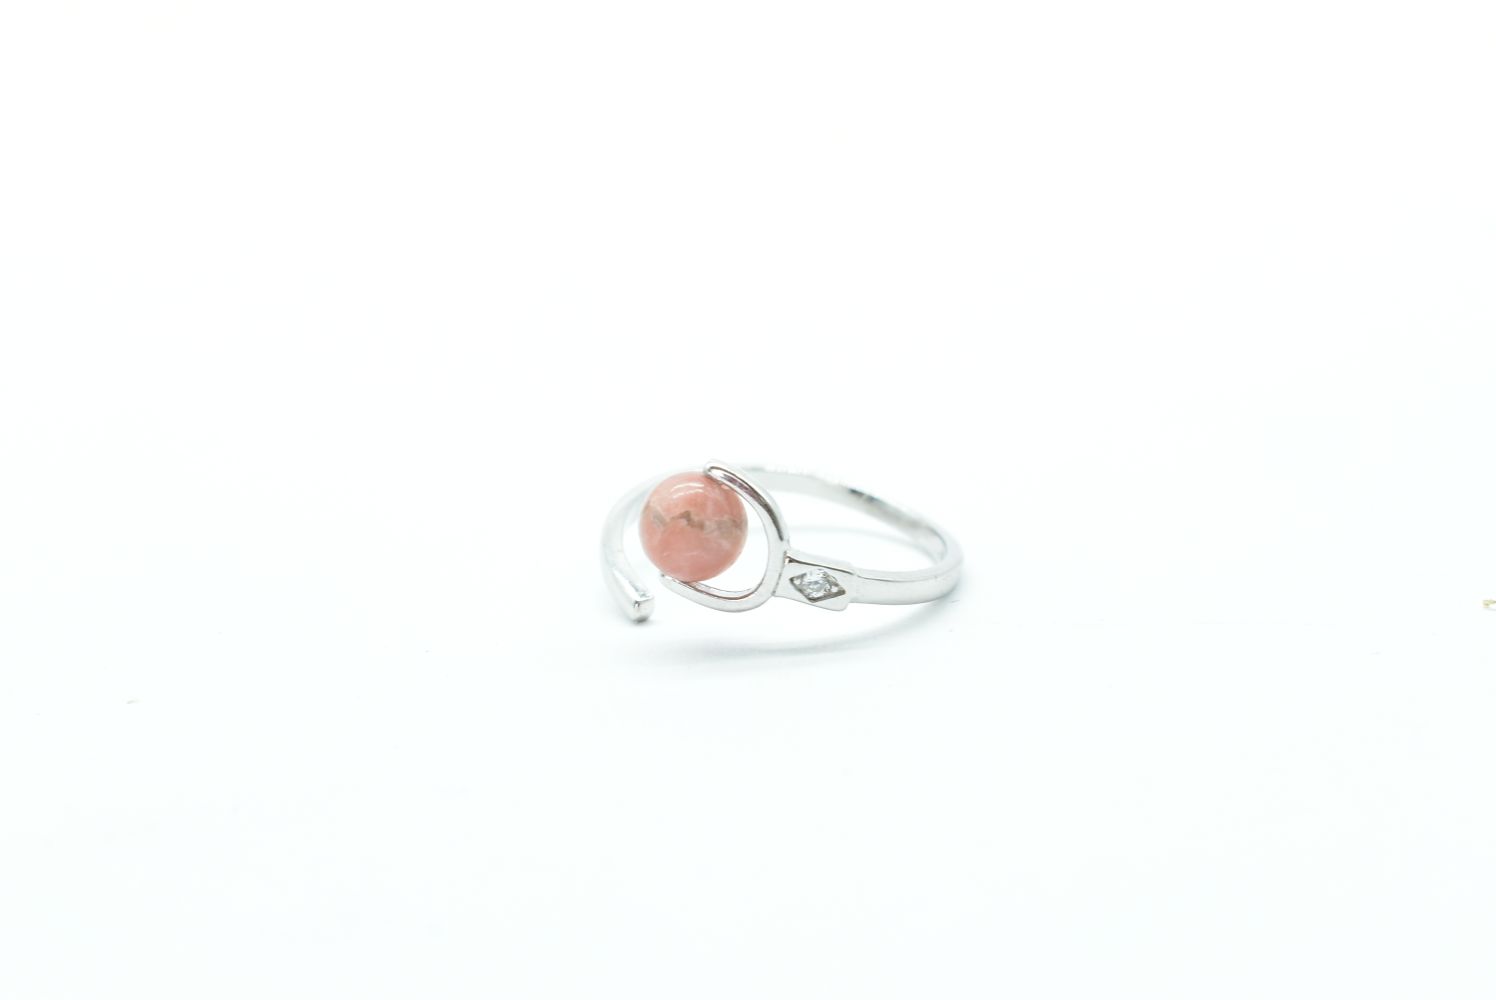 Ring with rhodochrosite stone and 925 silver - Adjustable